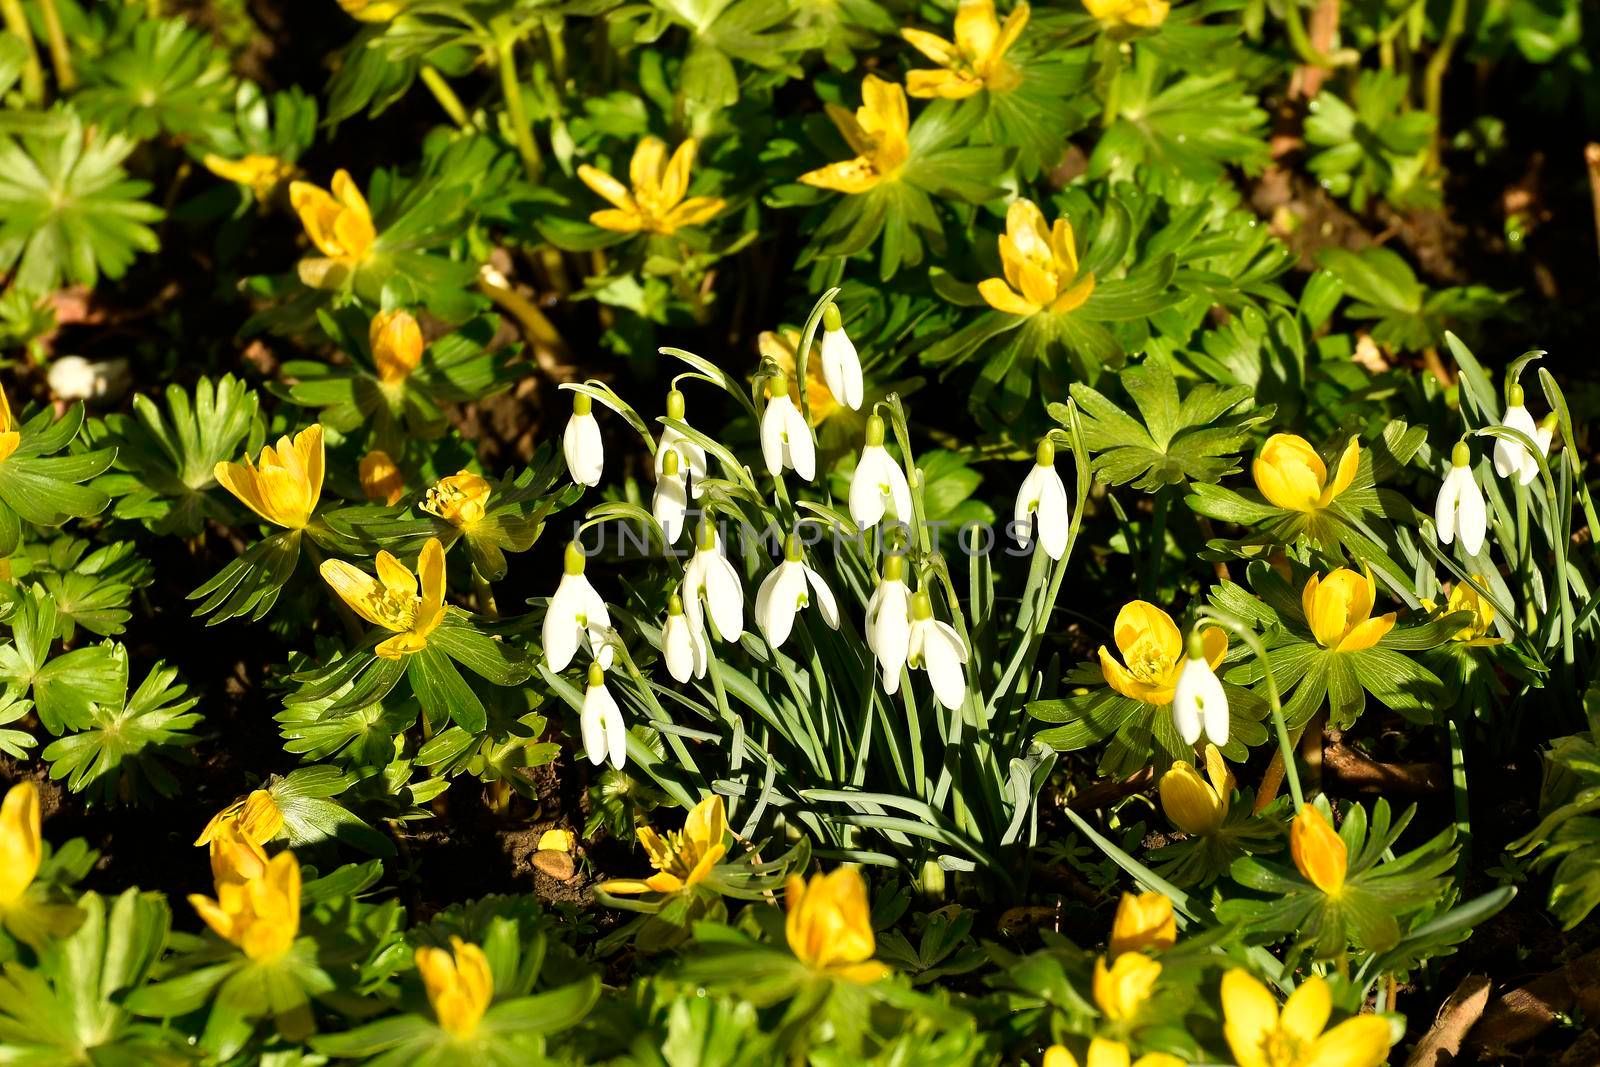 winter aconite and snowdrops in early spring in a German garden